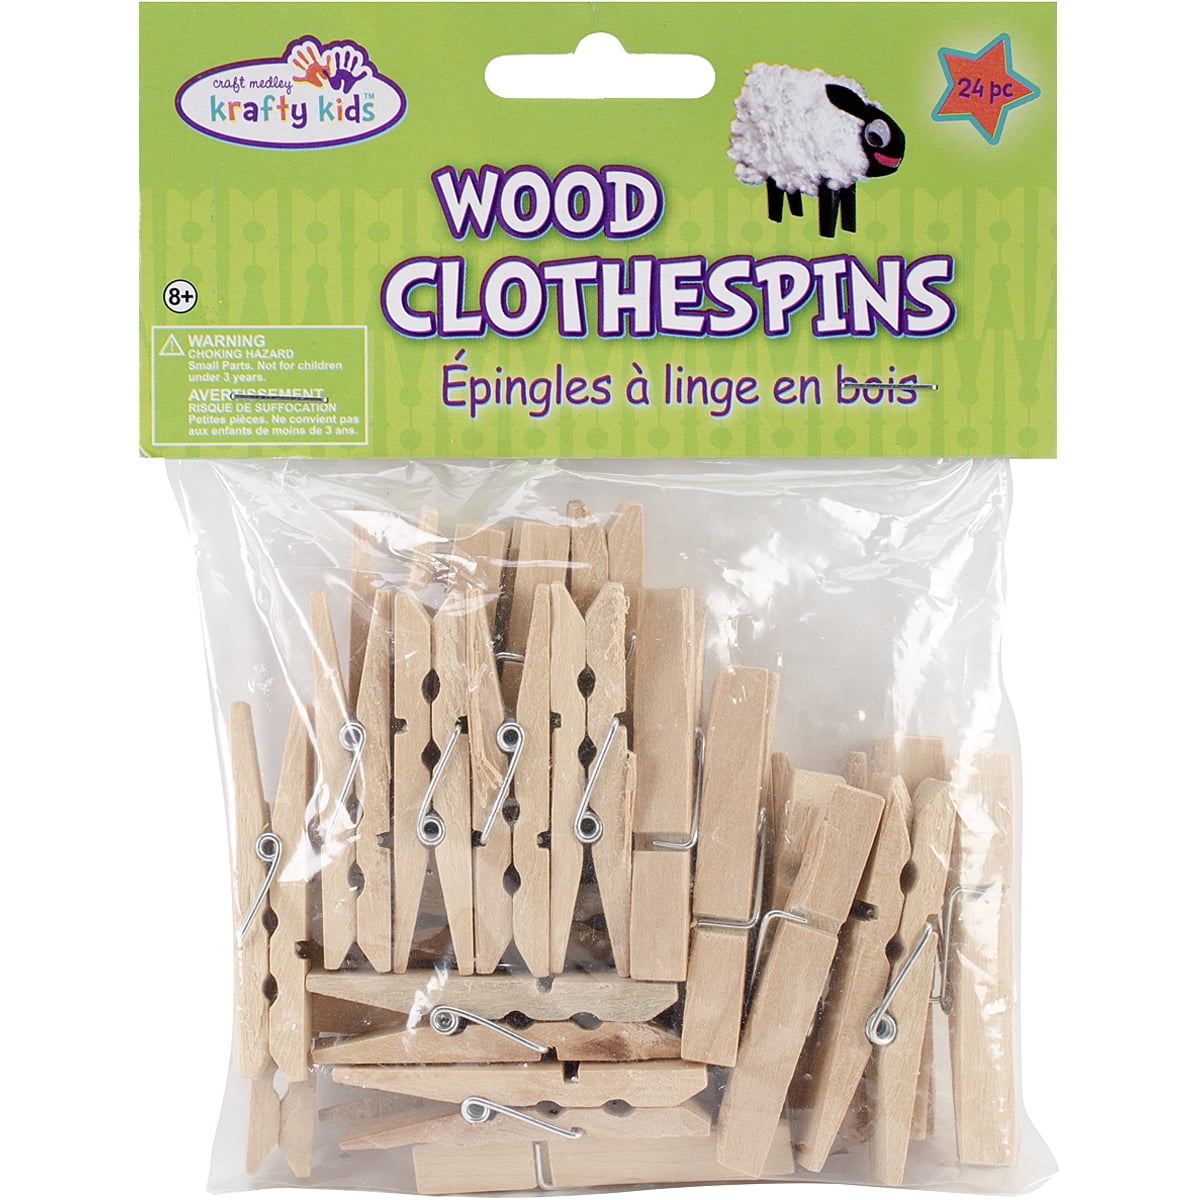 Mini Natural Wooden Clothespins with Jute Twine, 250pcs, 1 Inch Photo Paper  Peg Pin Craft Clips with 66ft Natural Twine for Scrapbooking, Arts 